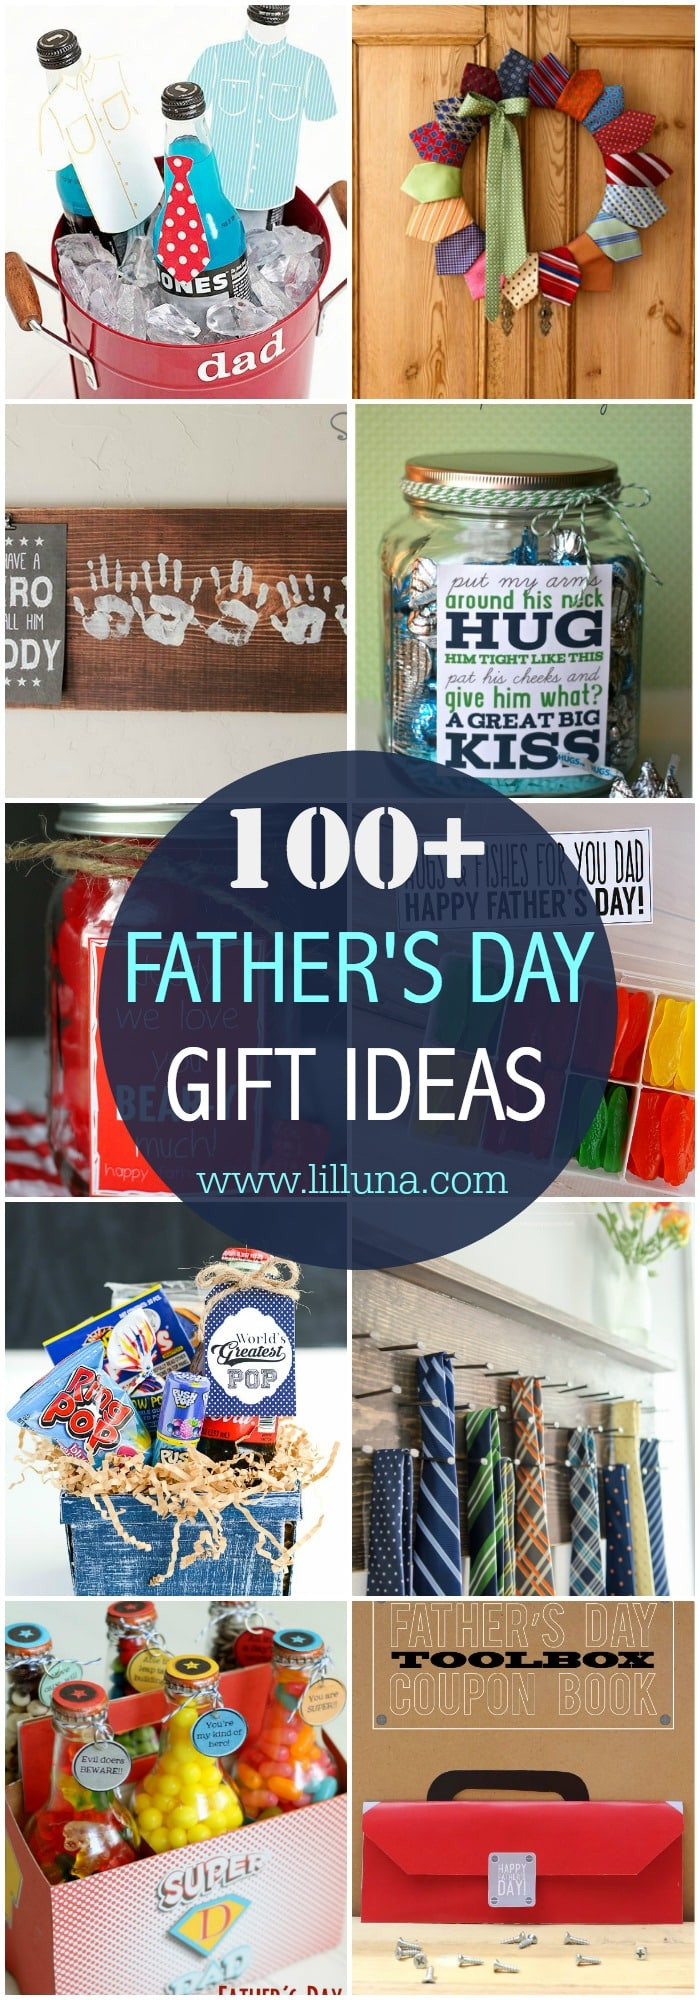 Fathersday Gift Ideas
 100 DIY Father s Day Gifts